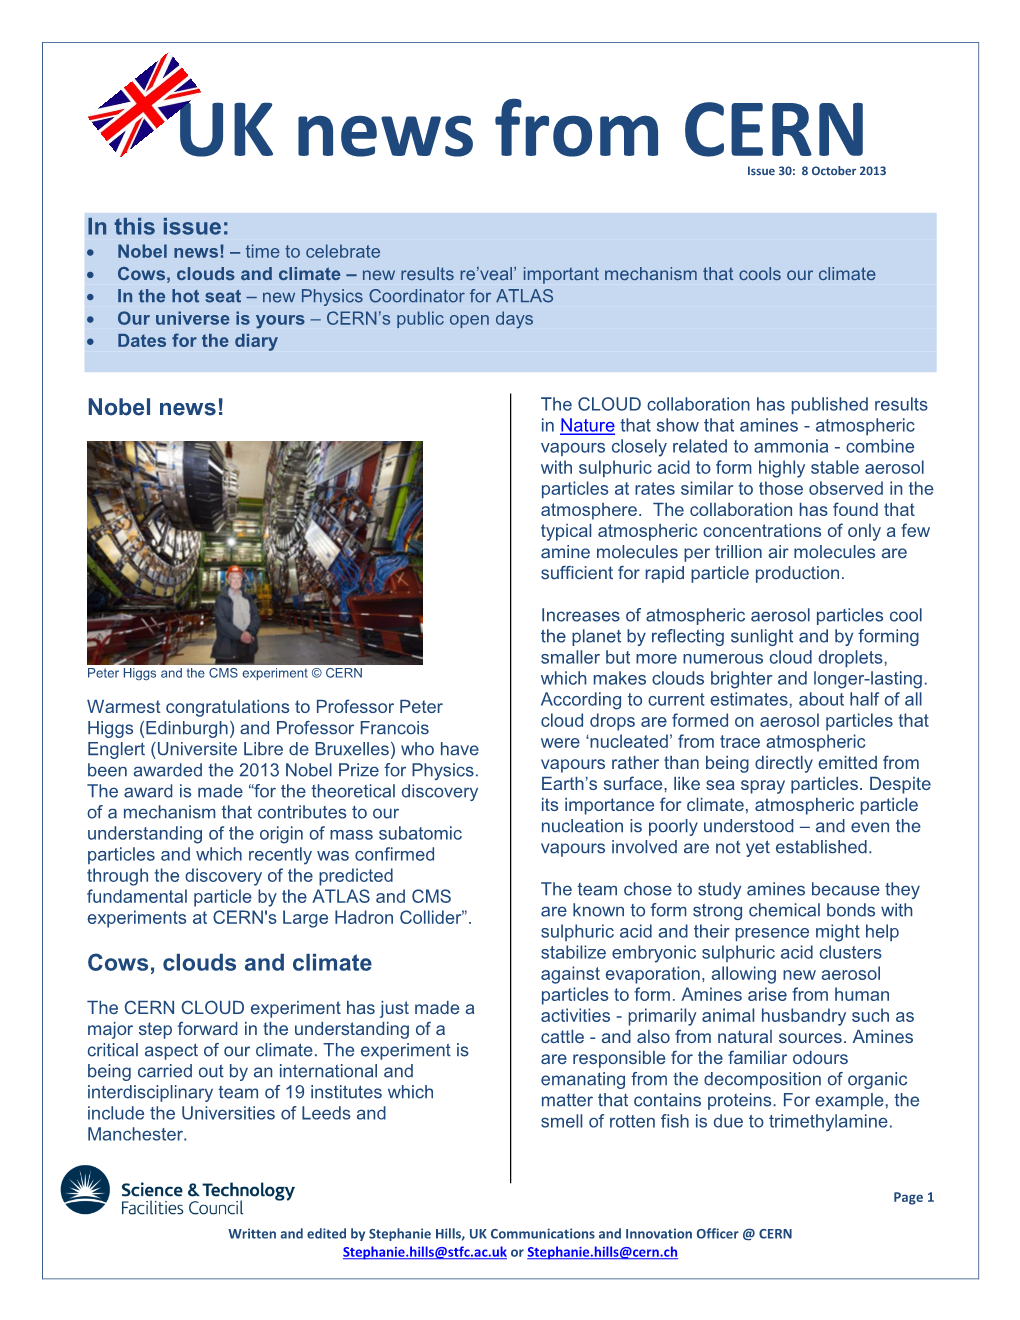 UK News from CERN Issue 30: 8 October 2013